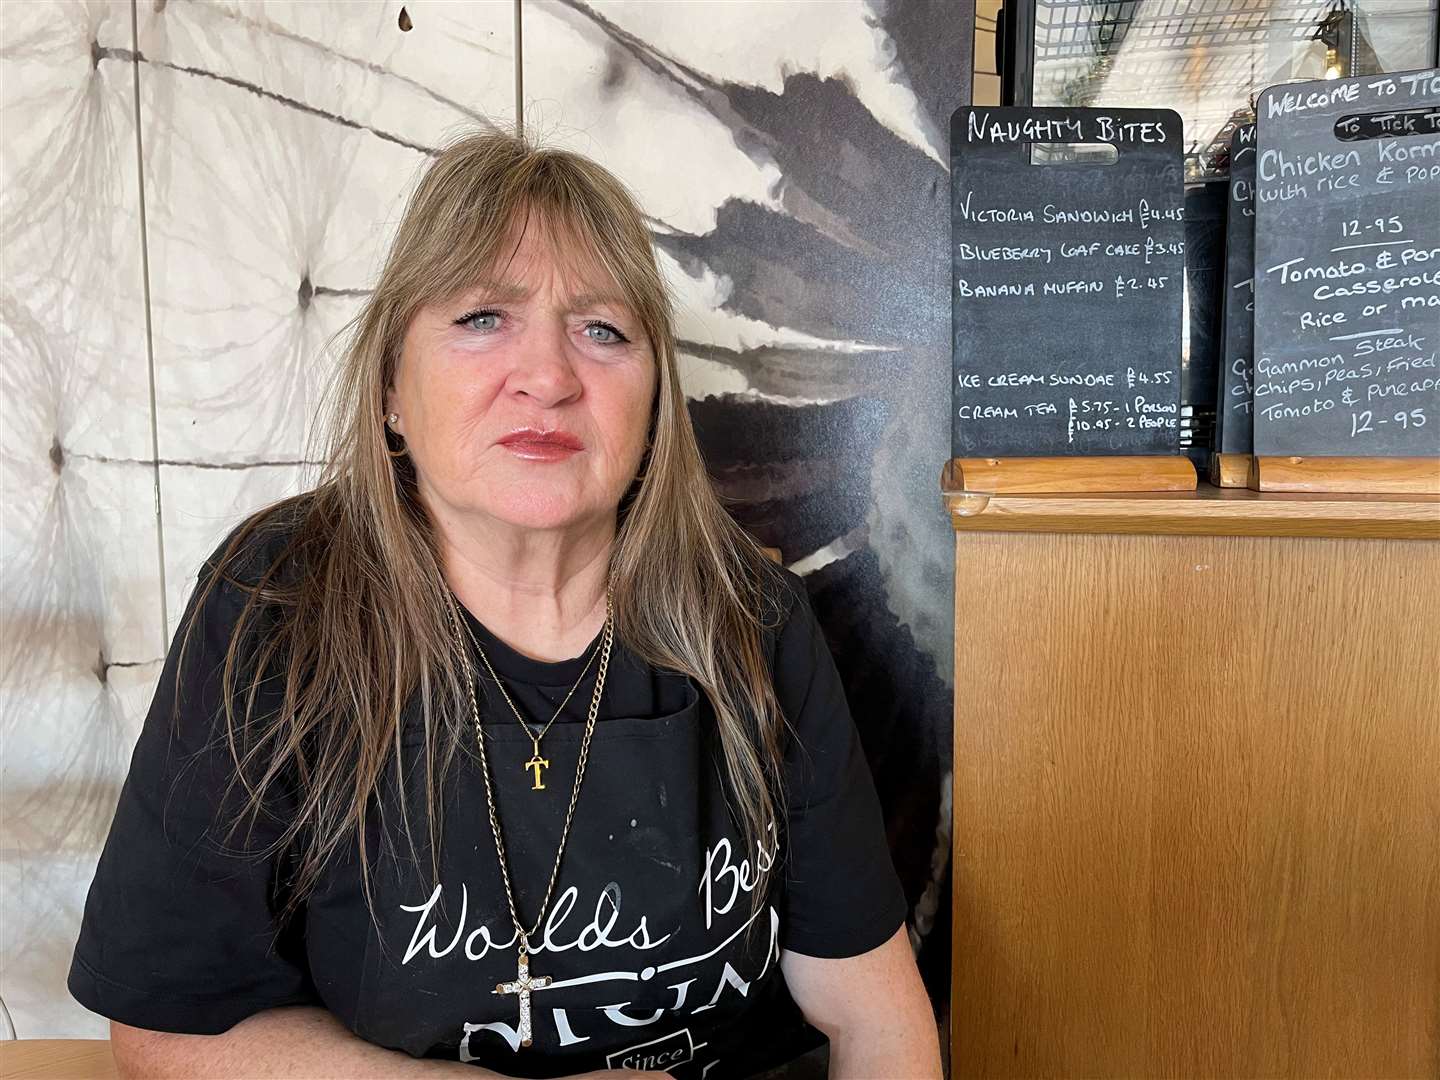 Cafe worker Teresa said takings are down by more than a third